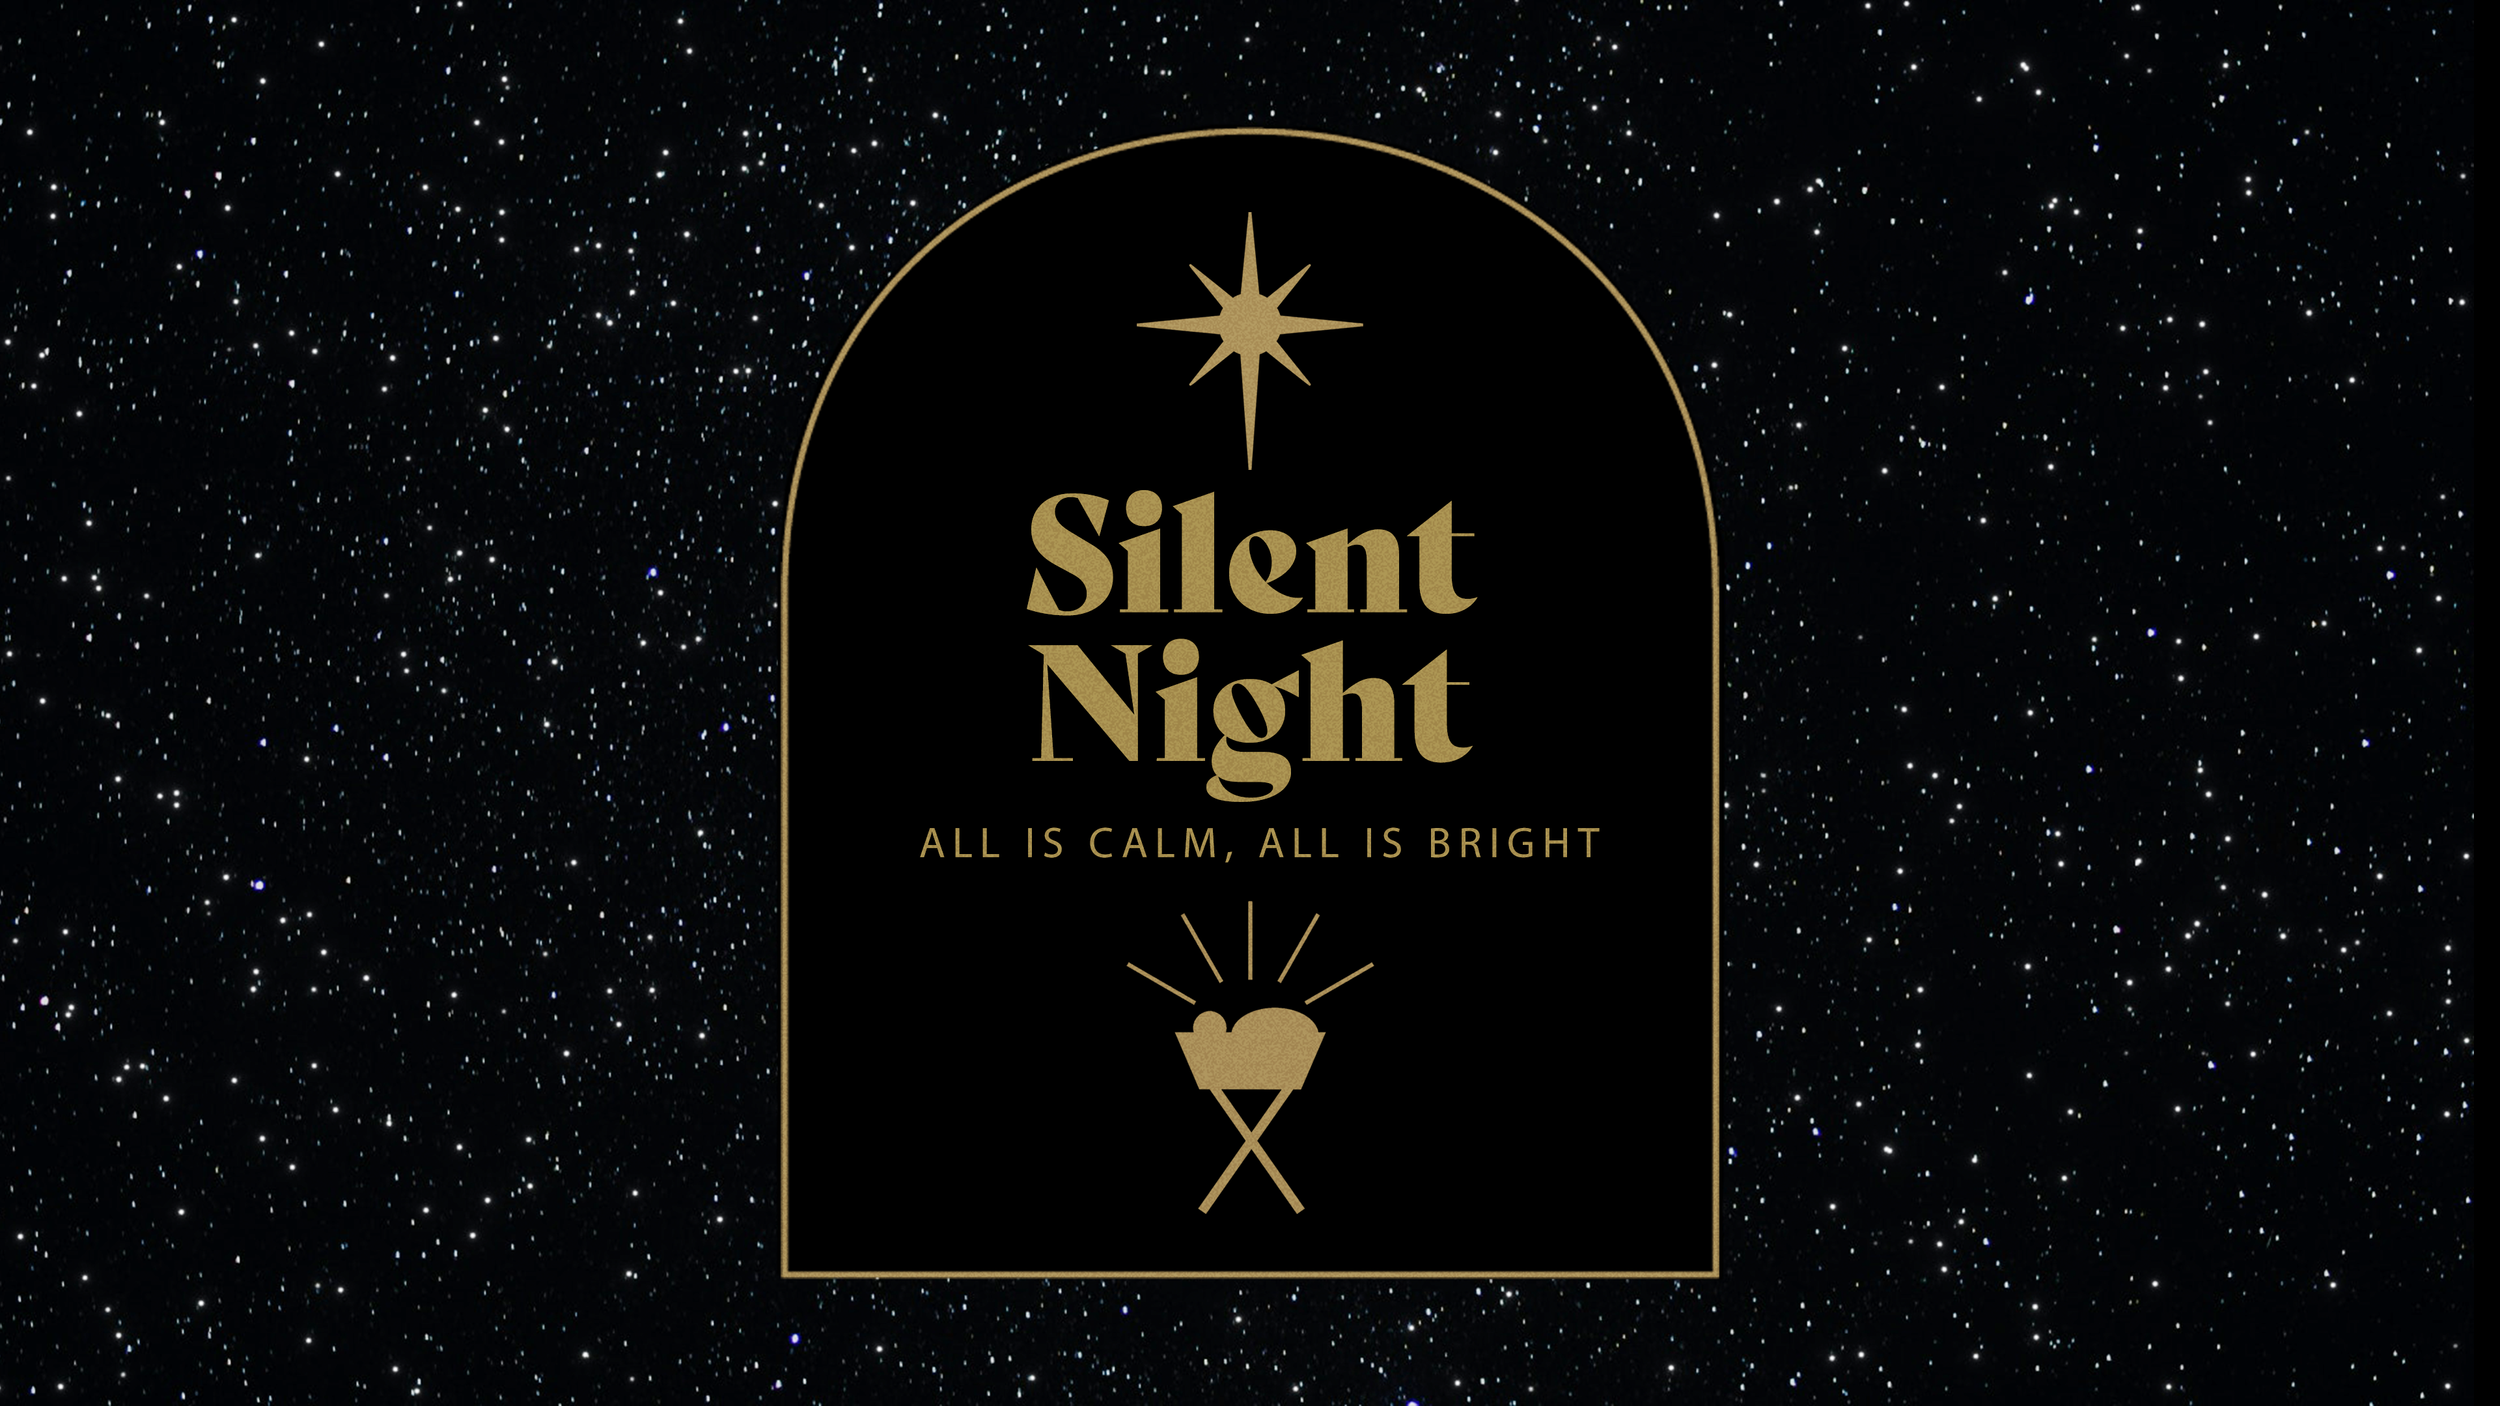 Silent Night Small Group Questions